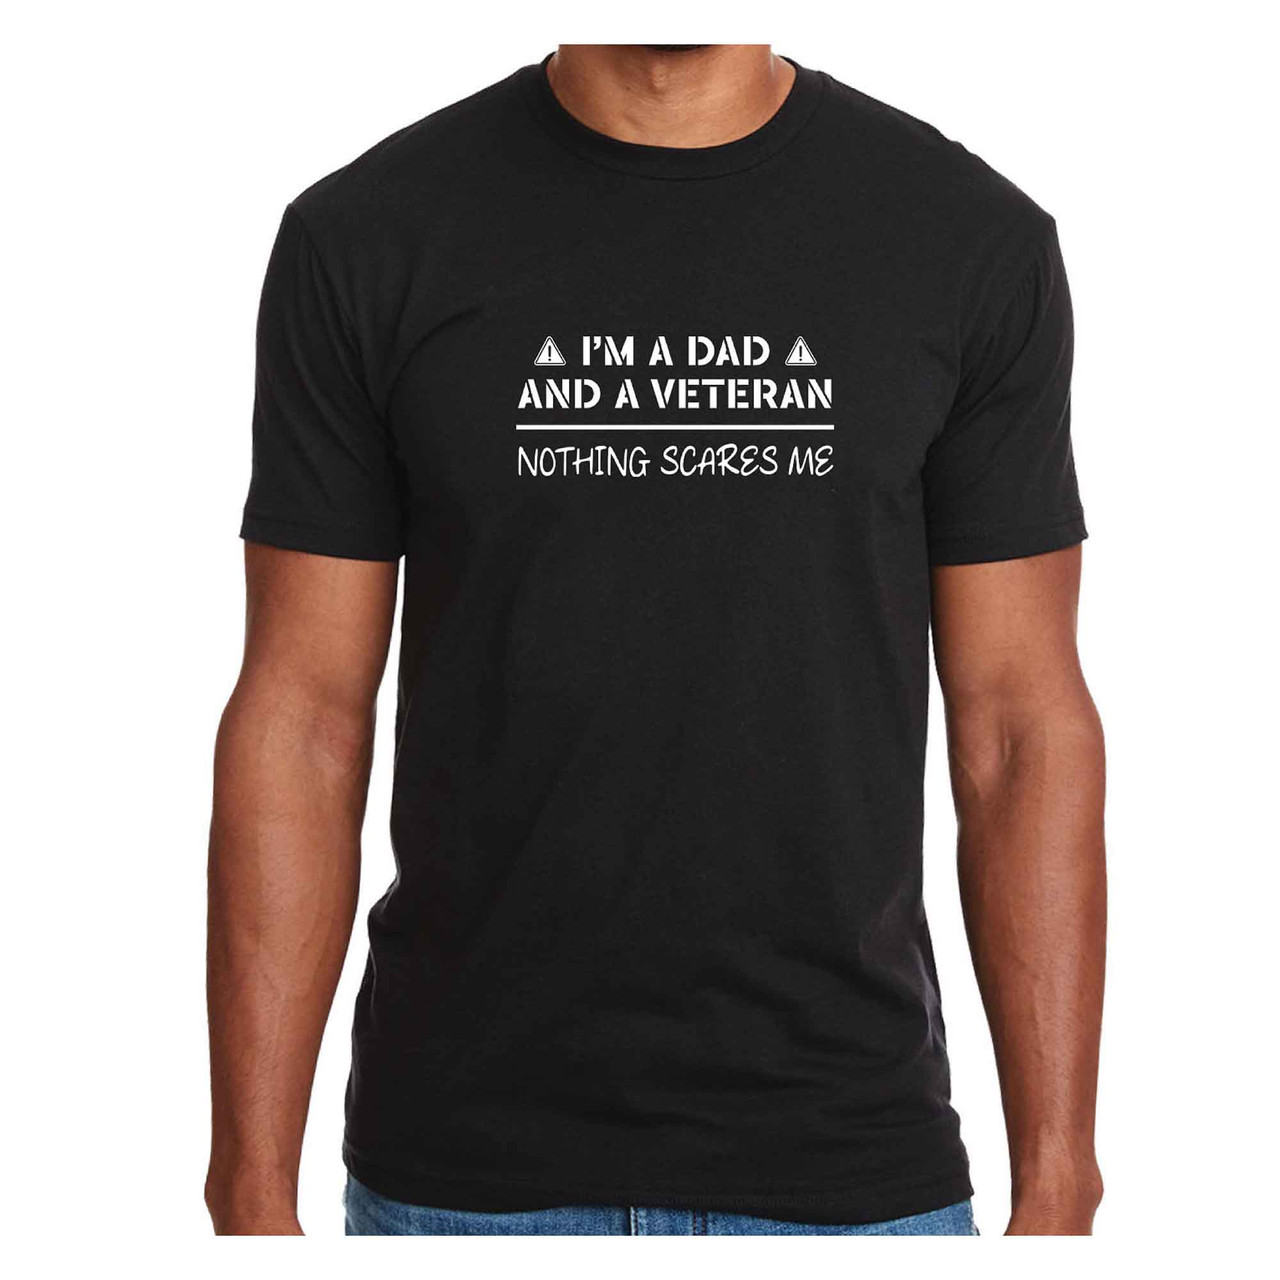 Veteran T-Shirt I'm A Dad And A Veteran Nothing Scares Me black front